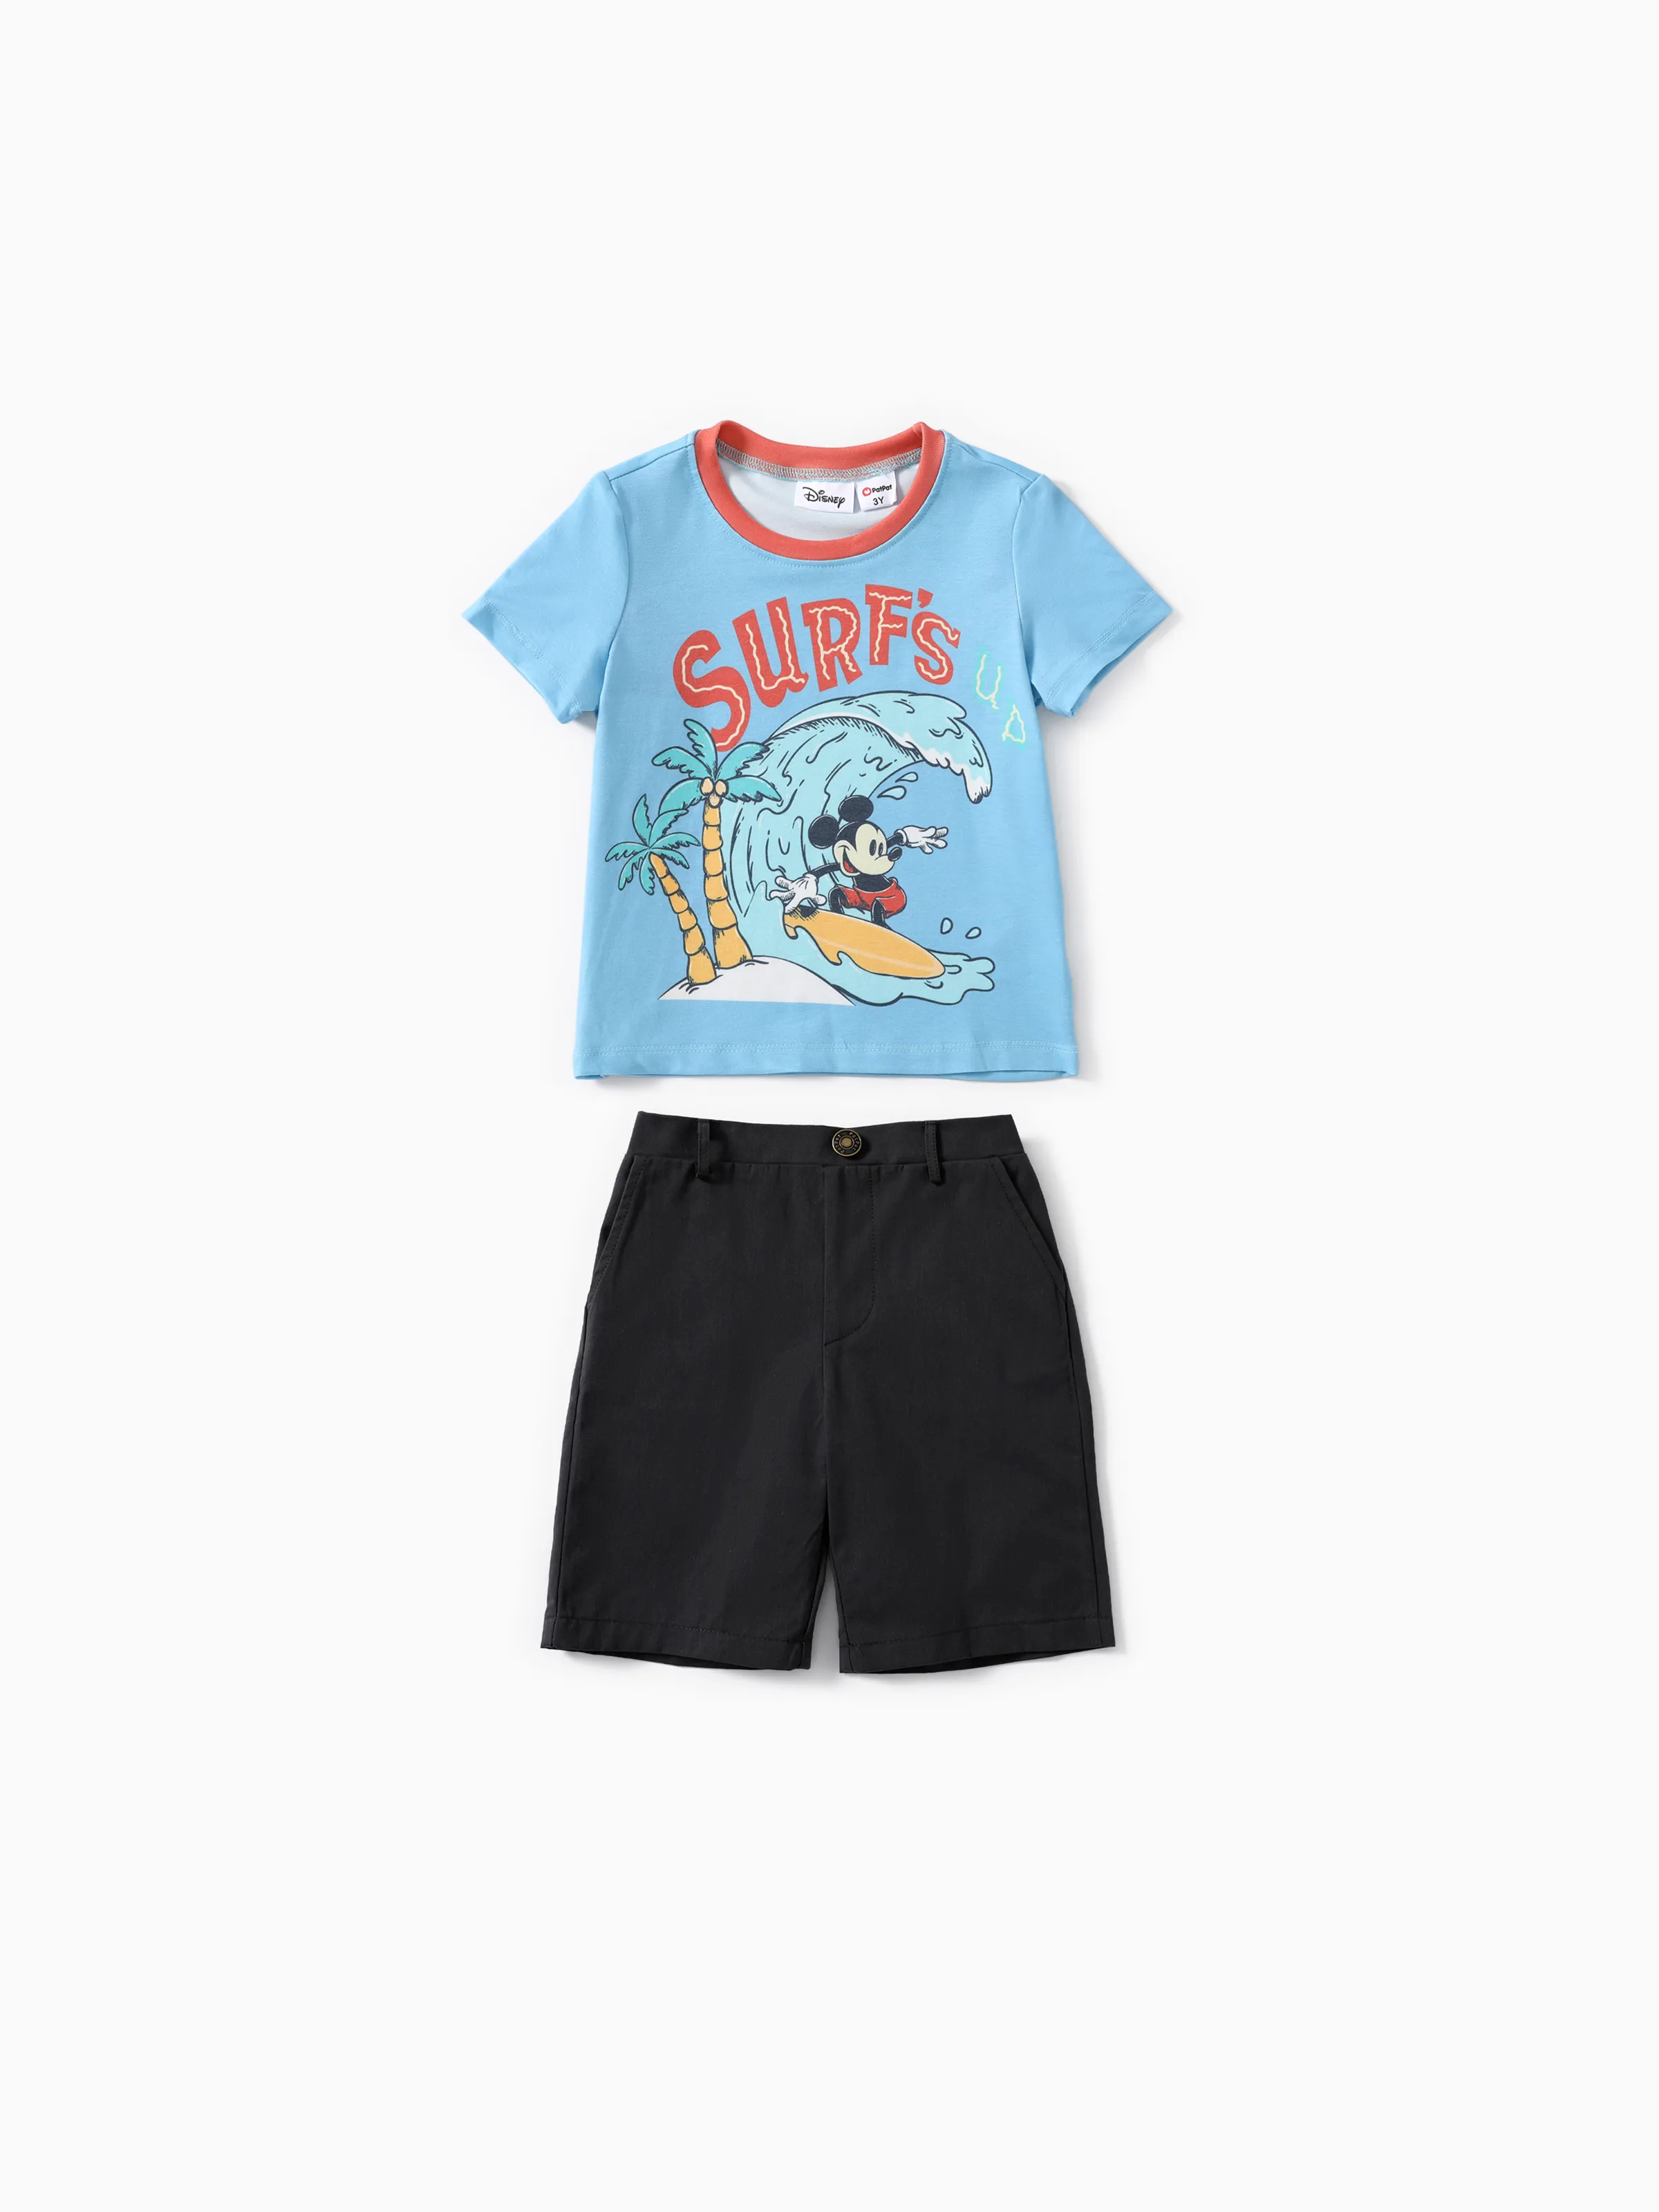 

Disney Mickey and Friends Toddler Boys 2pcs Naia™ Beach Style Character Print Top with Cotton Shorts Set